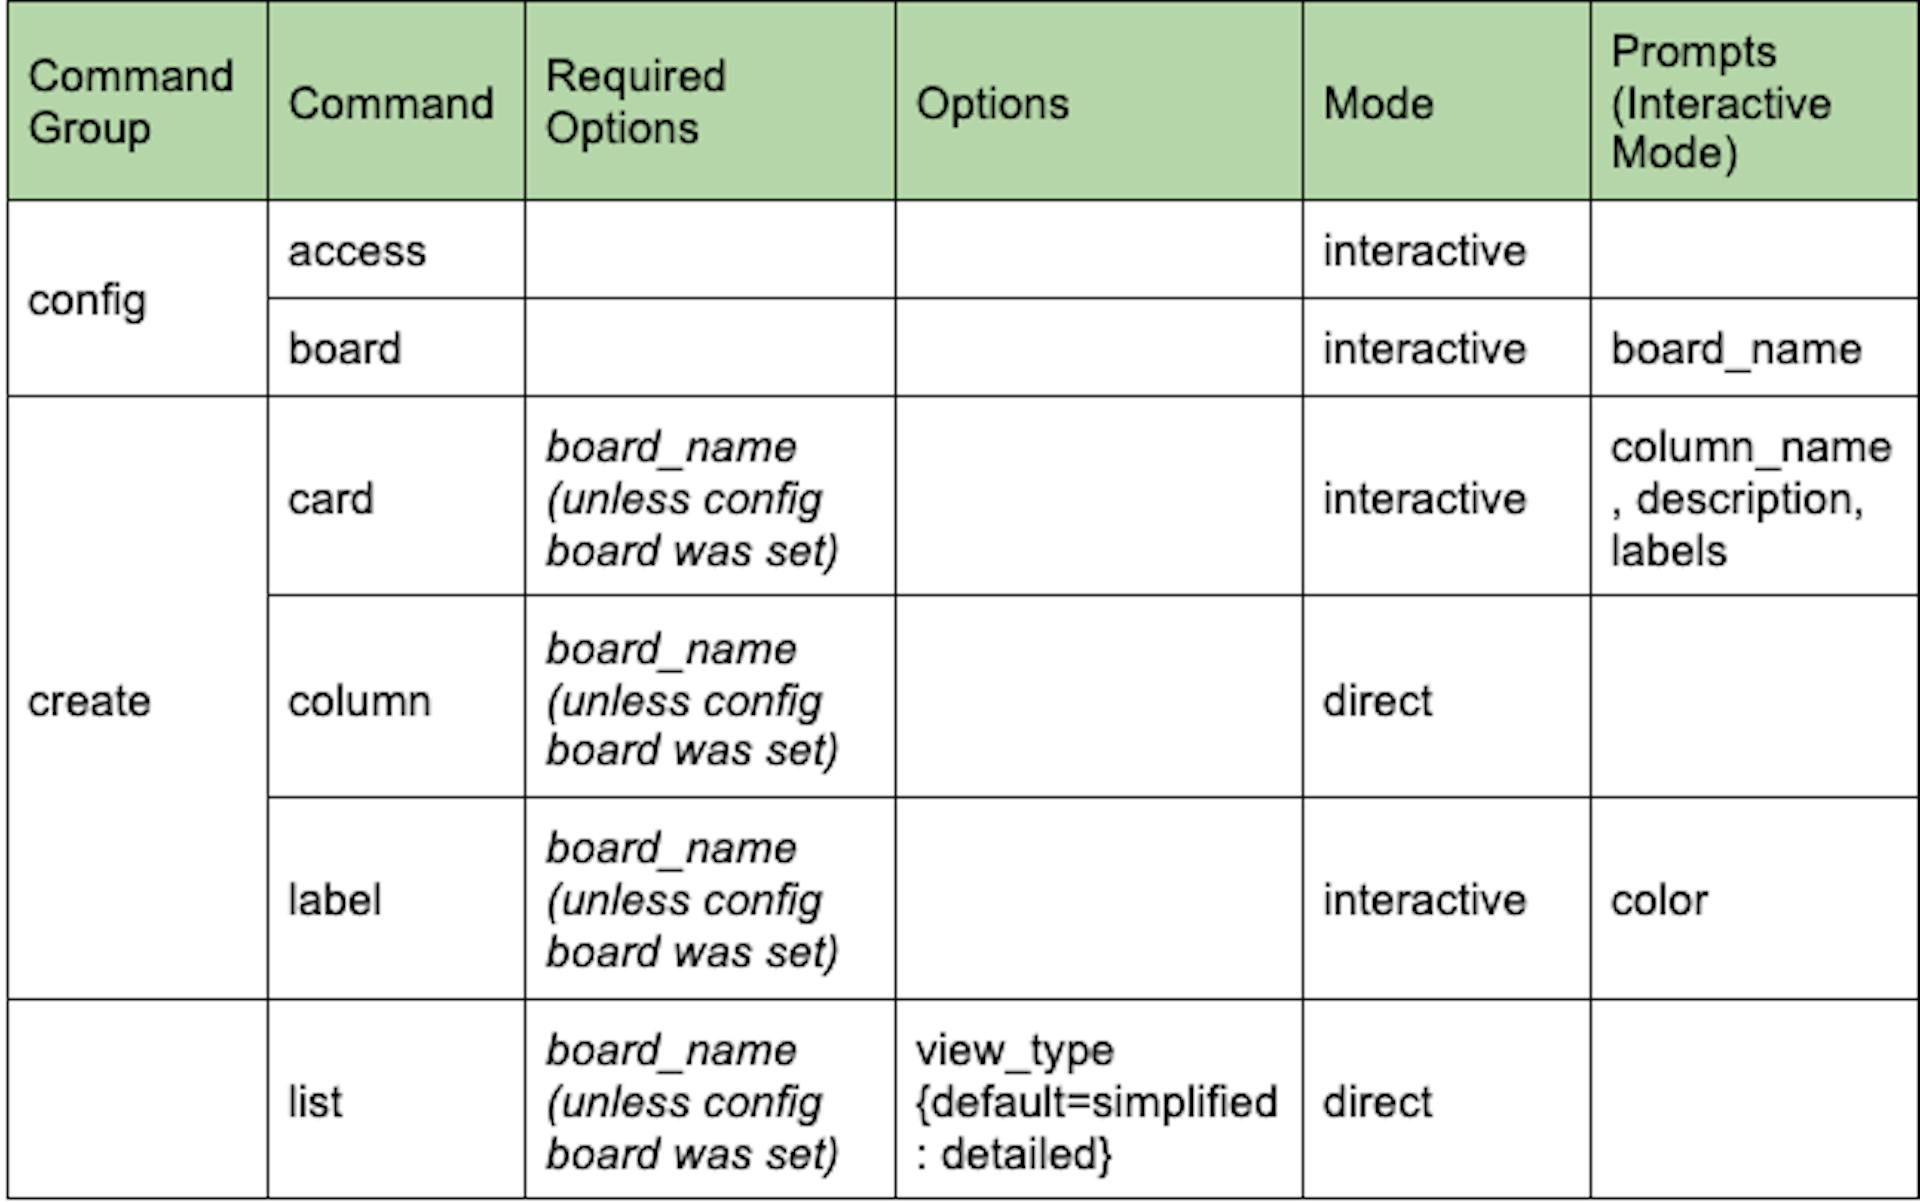 Detailed table view of CLI structure based on requirements